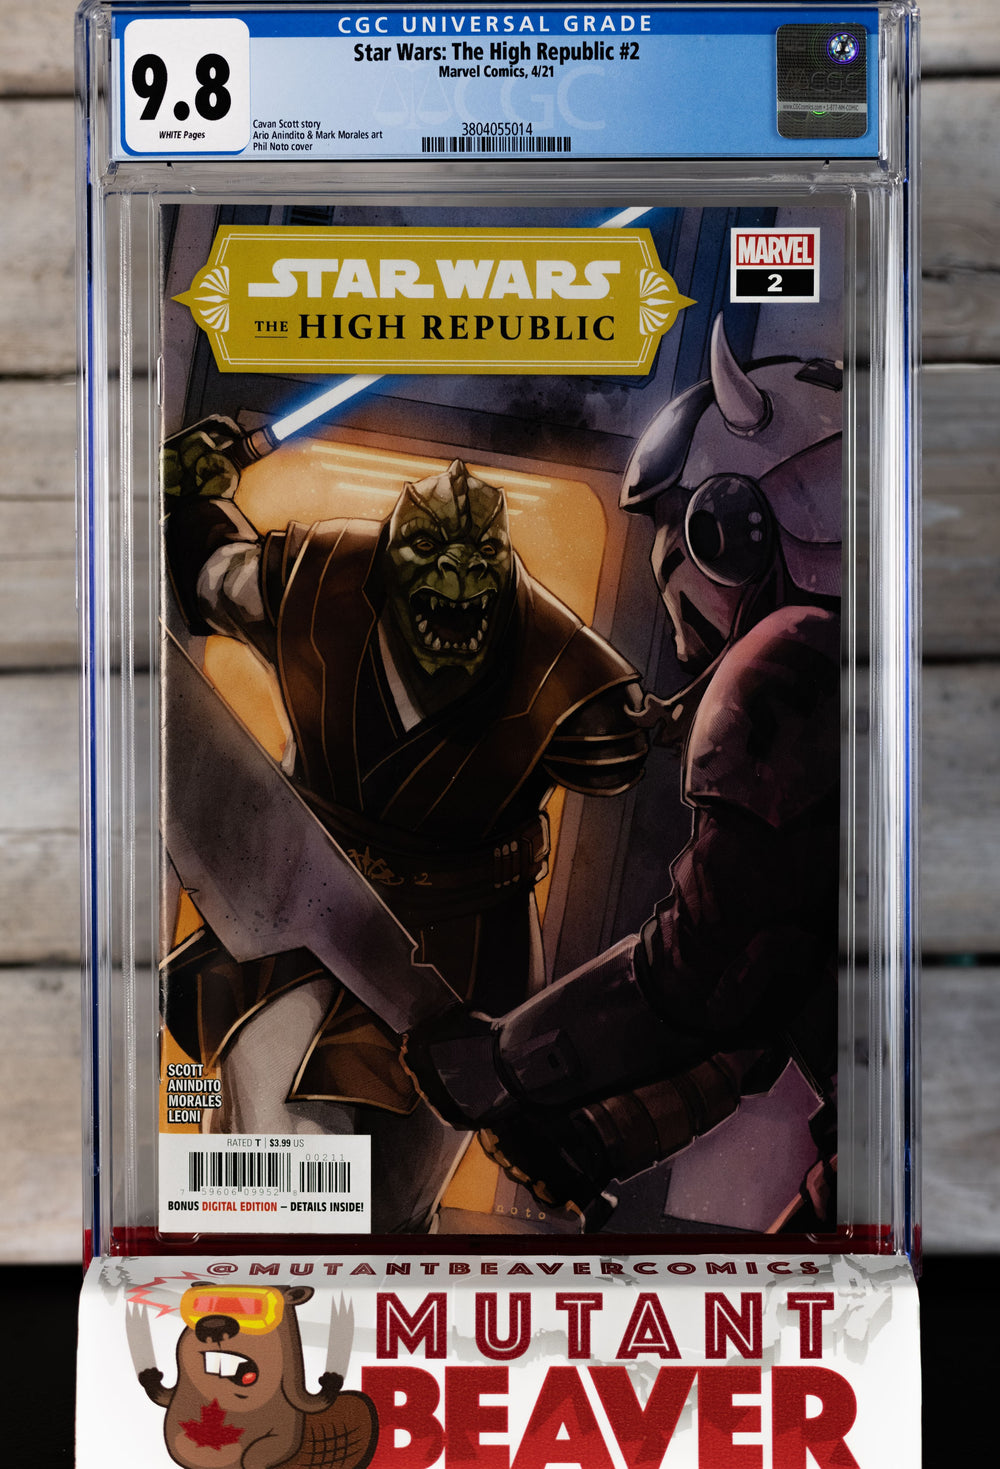 CGC 9.8 STAR WARS: THE HIGH REPUBLIC #2 Phil Noto TRADE DRESS EXCLUSIVE